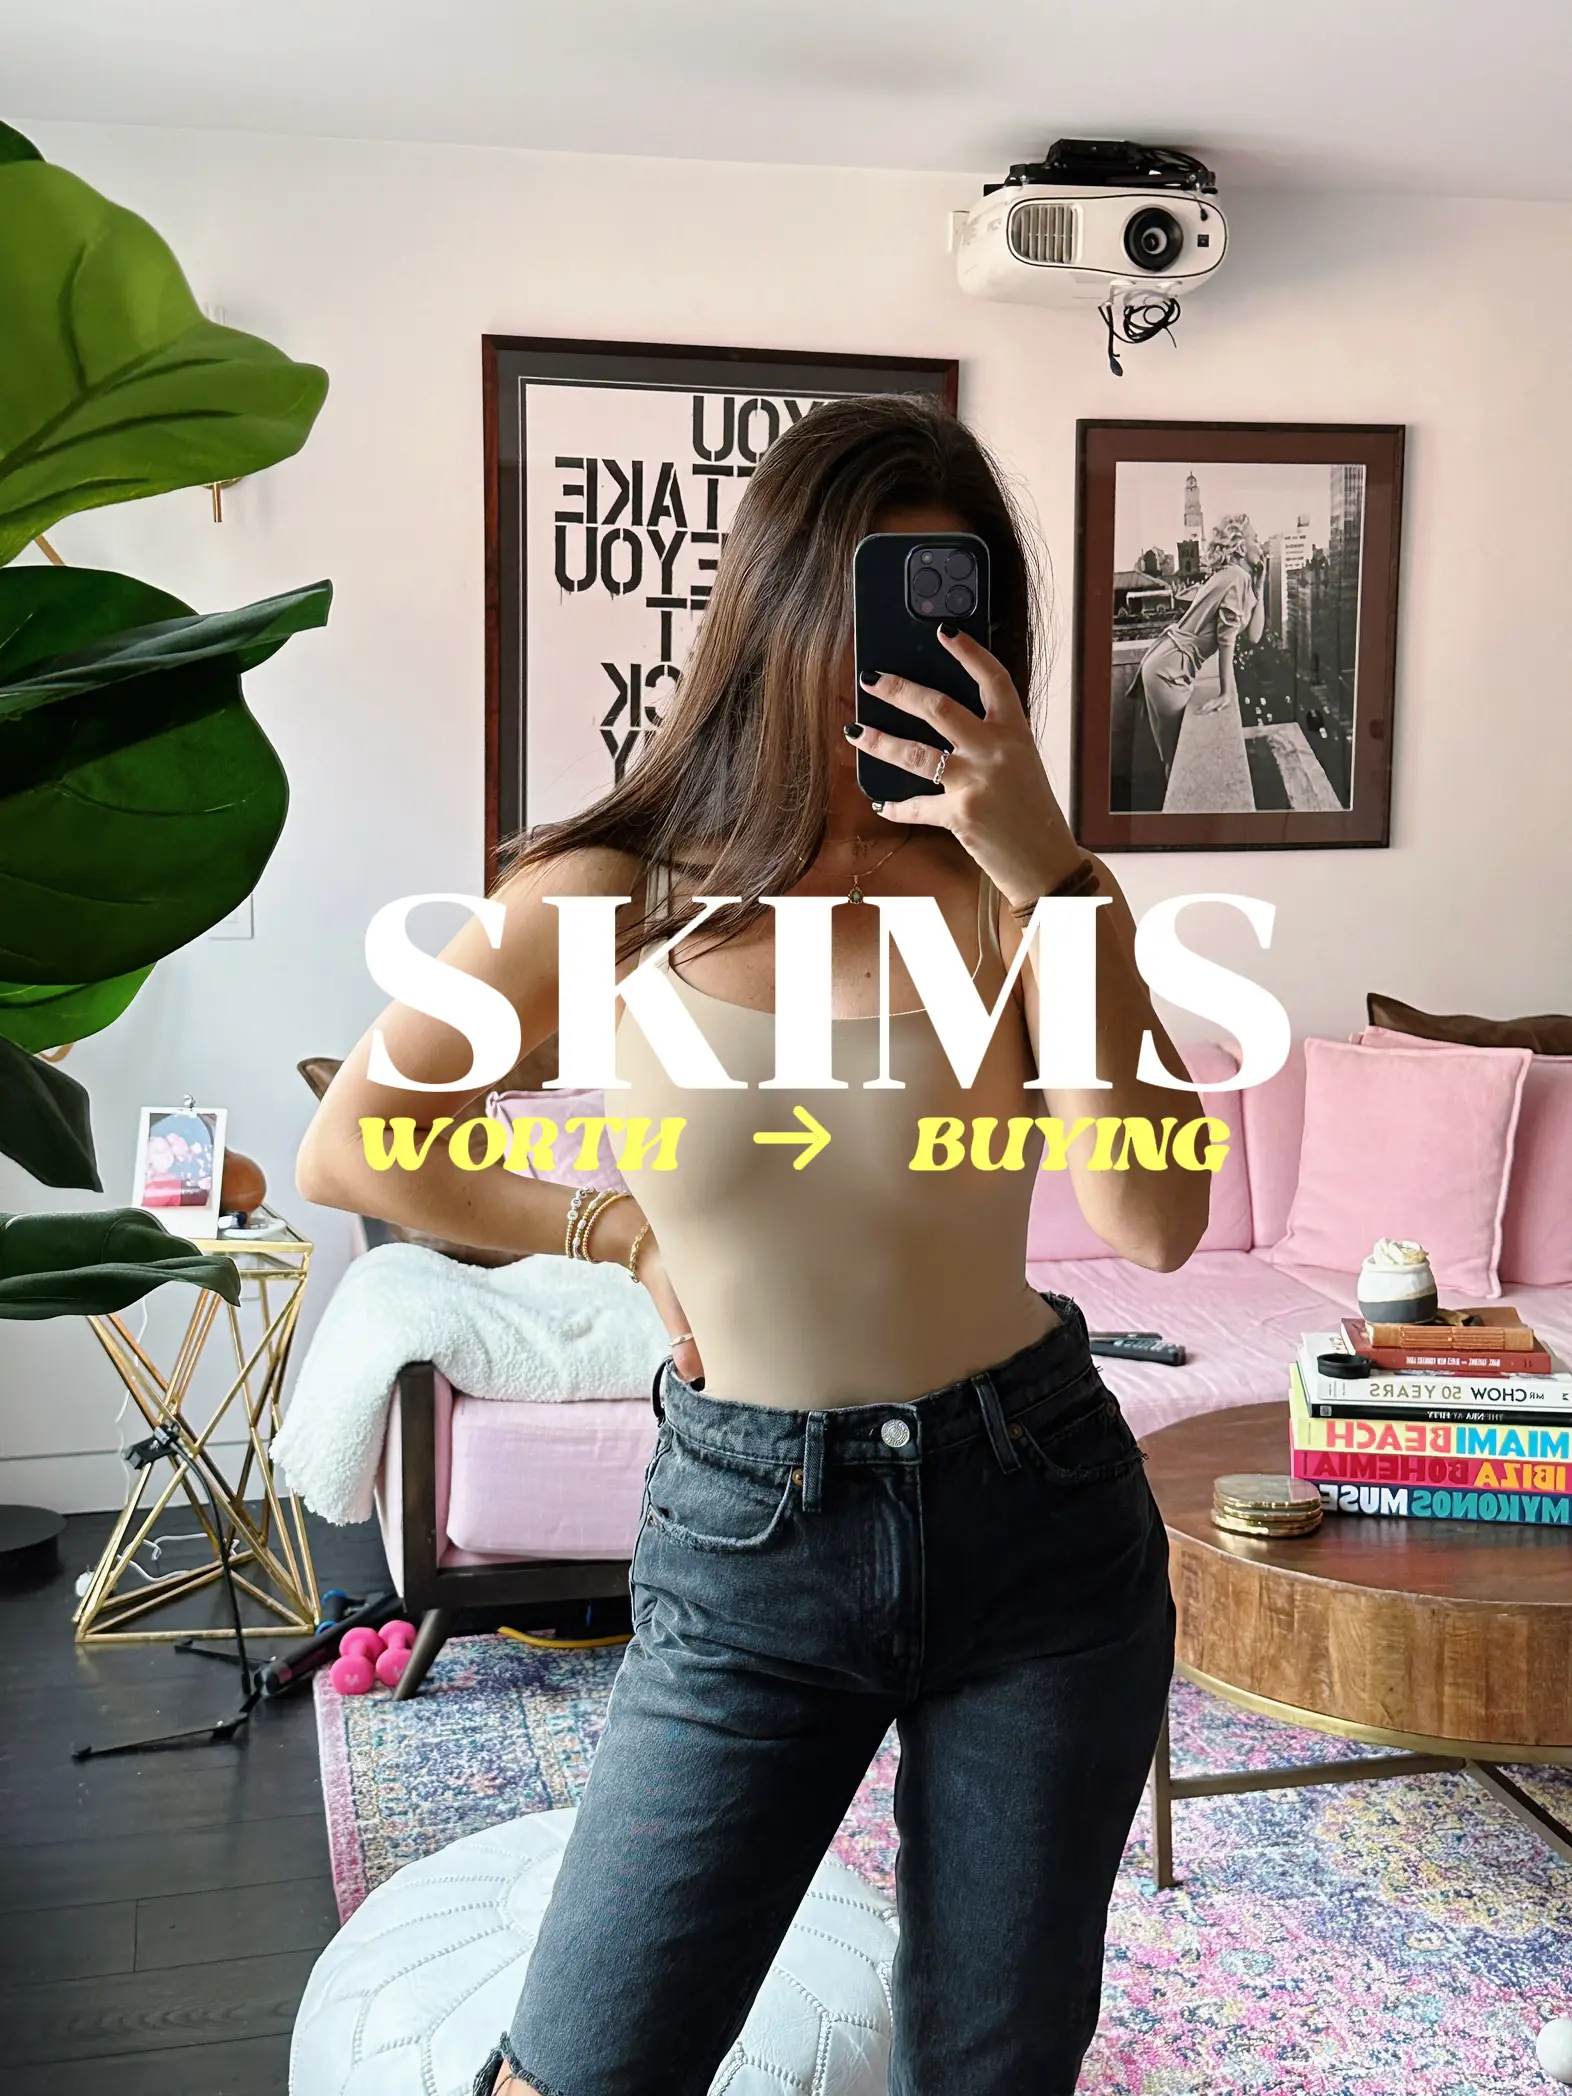 skims bodysuit try on 💗💕 Here's 3 cute Valentine's Day outfits styling  the Skims “ fits everybody lace cami bodysuit” that